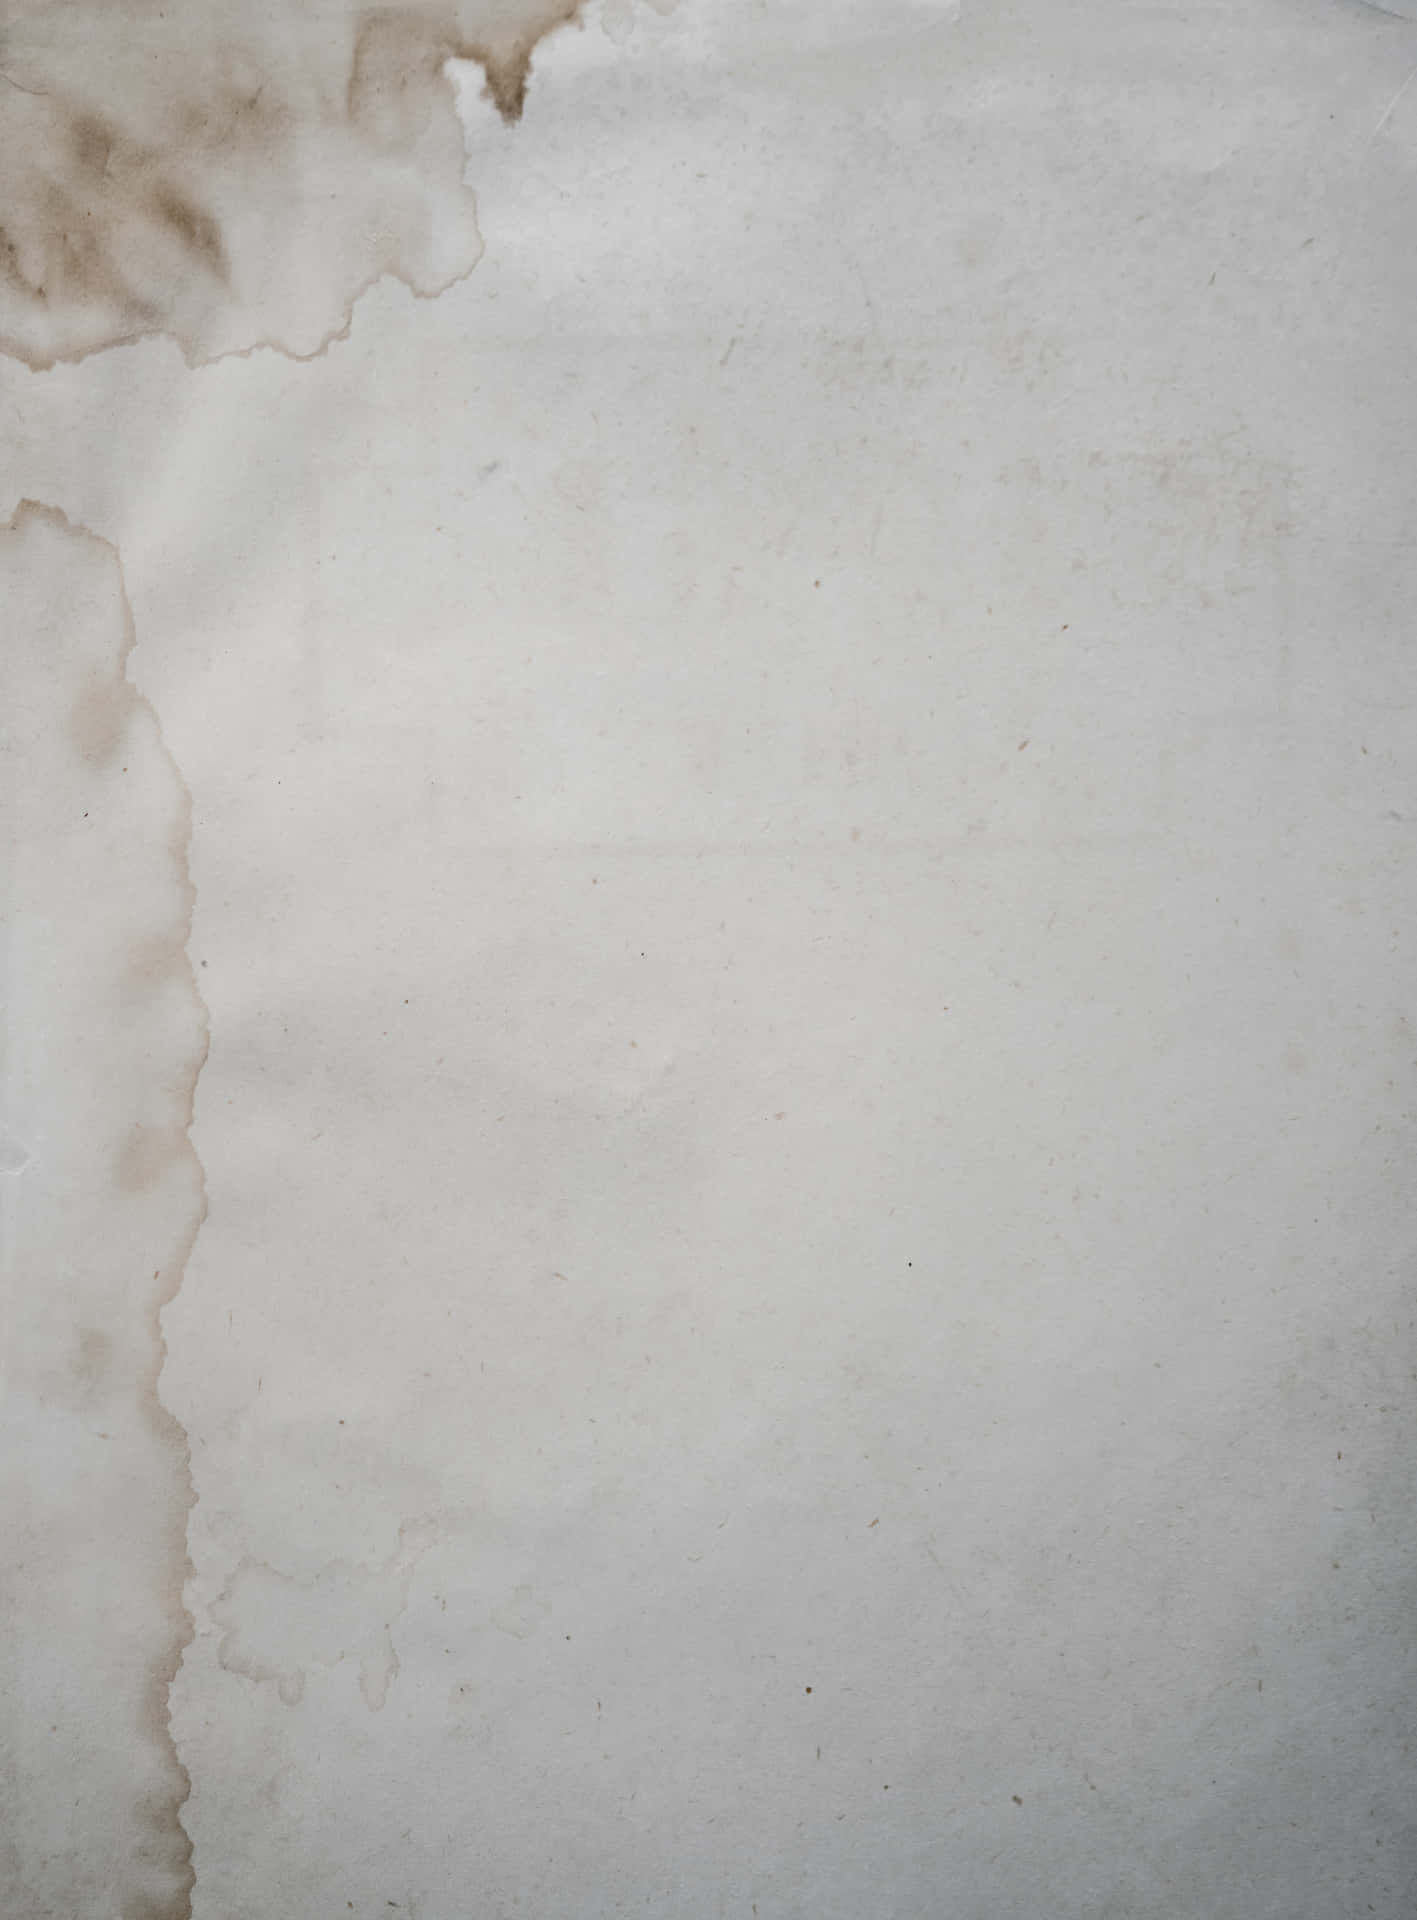 Paper With Water Stains Wallpaper